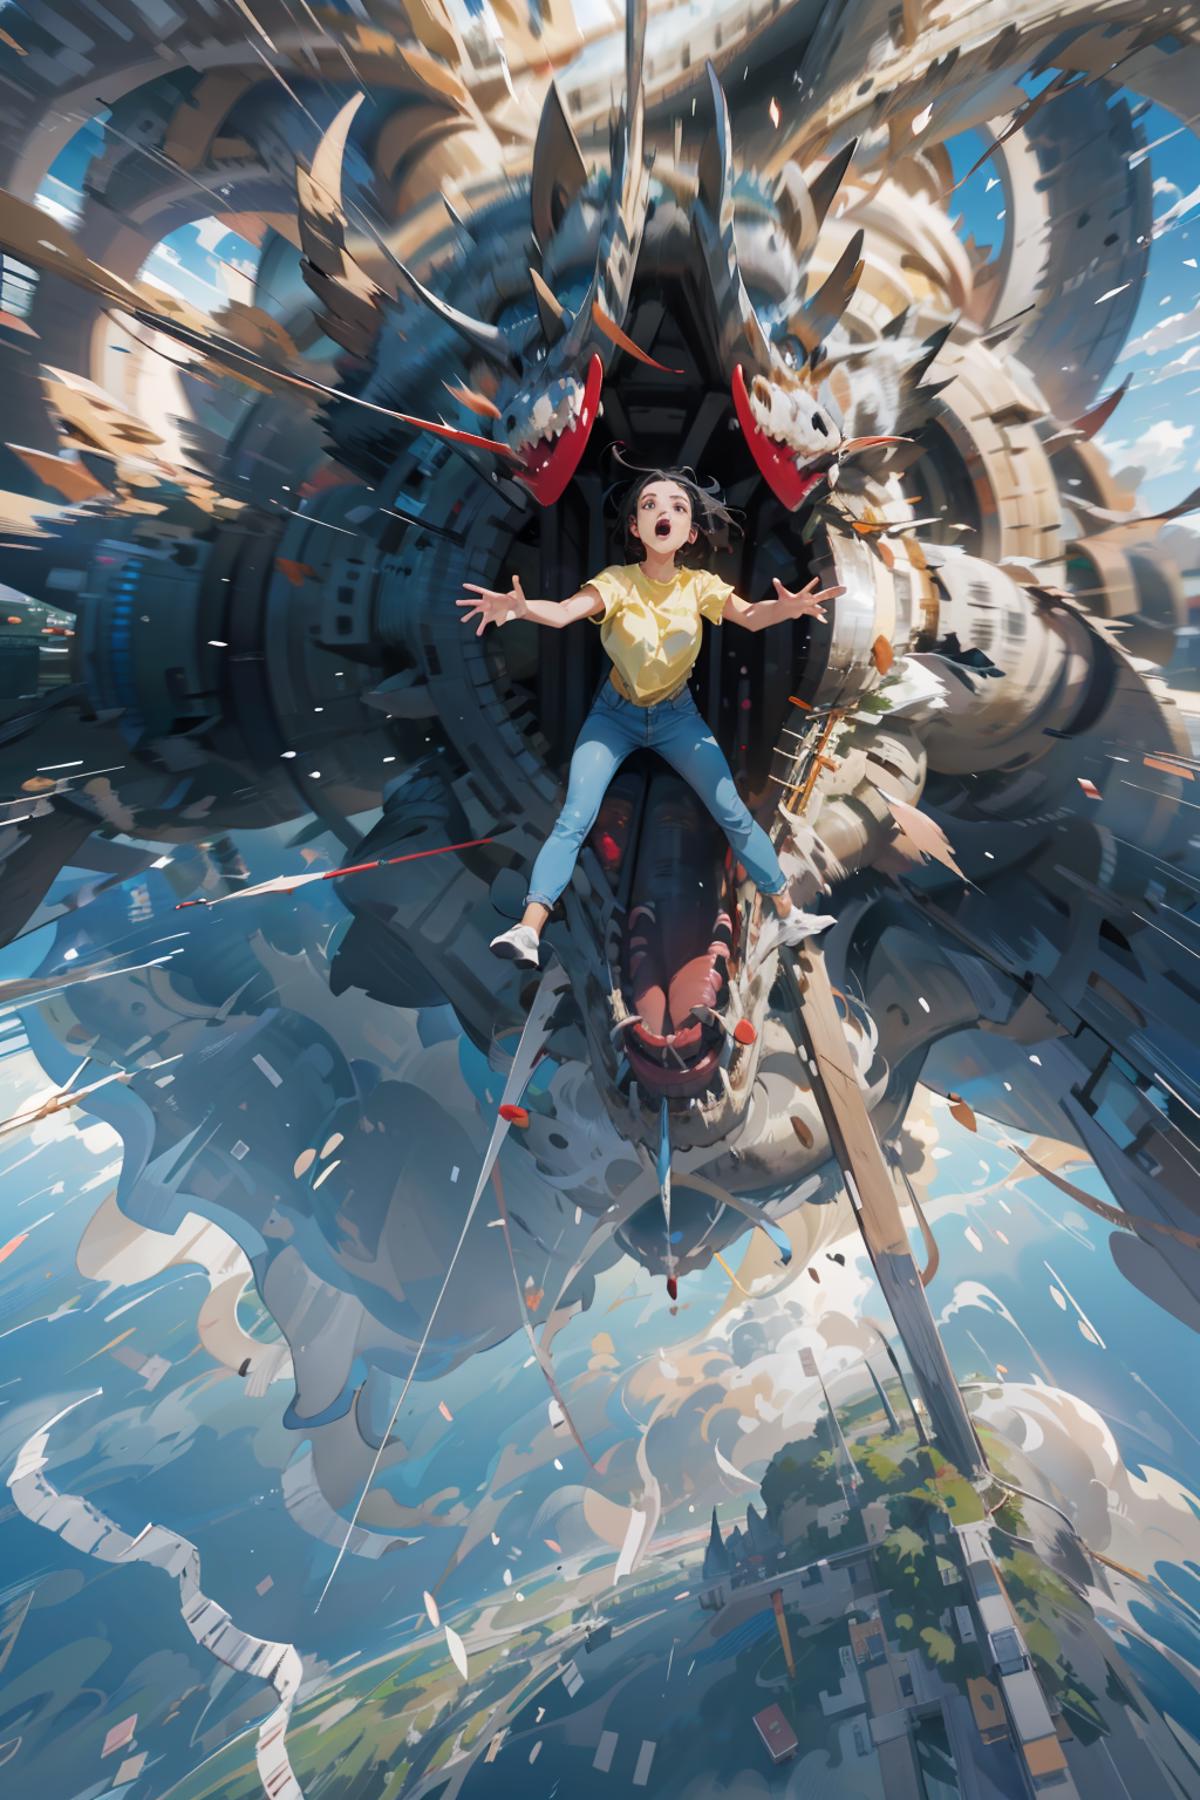 A woman in a yellow shirt is riding a giant robotic dragon.